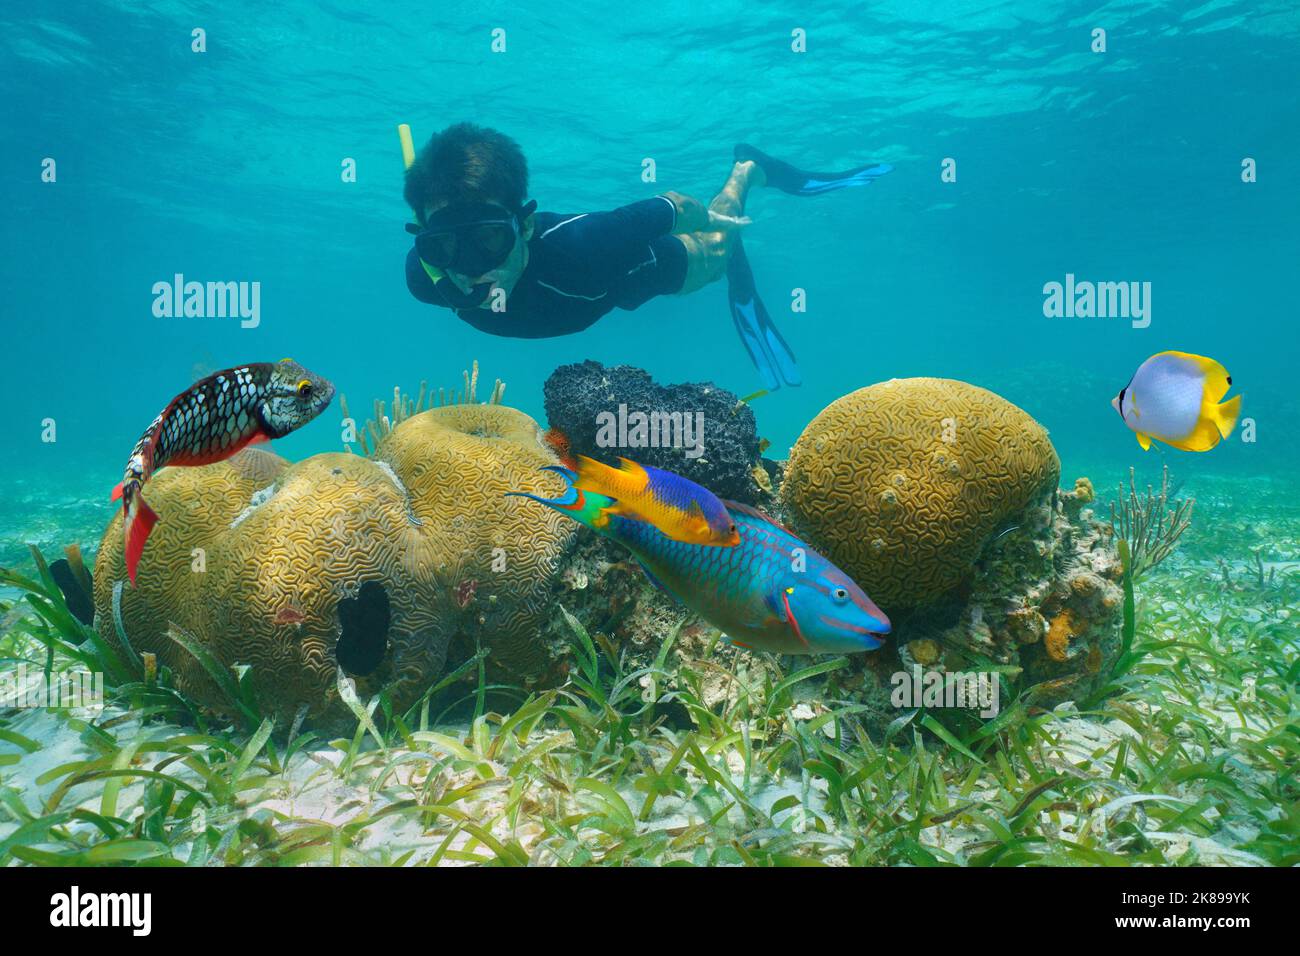 Man snorkeling underwater looking coral with colorful tropical fish, Caribbean sea Stock Photo